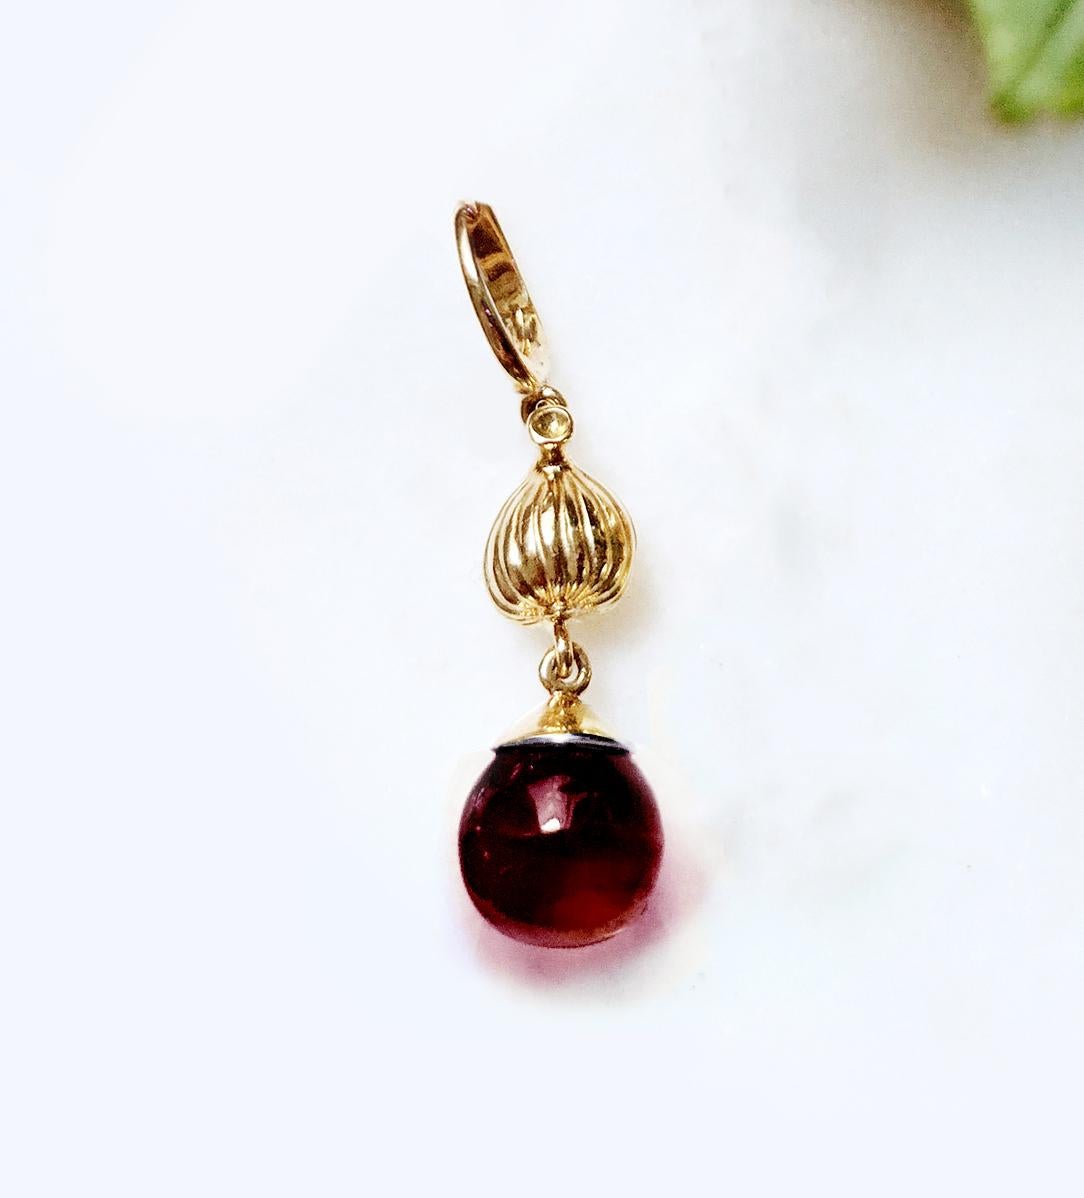 This Fig Garden necklace pendant with the cabochon garnet is made of 18 karat yellow gold. This collection was featured in Vogue UA. It is limited edition collection of jewellery by artist, with the unusual design and the gem open for the